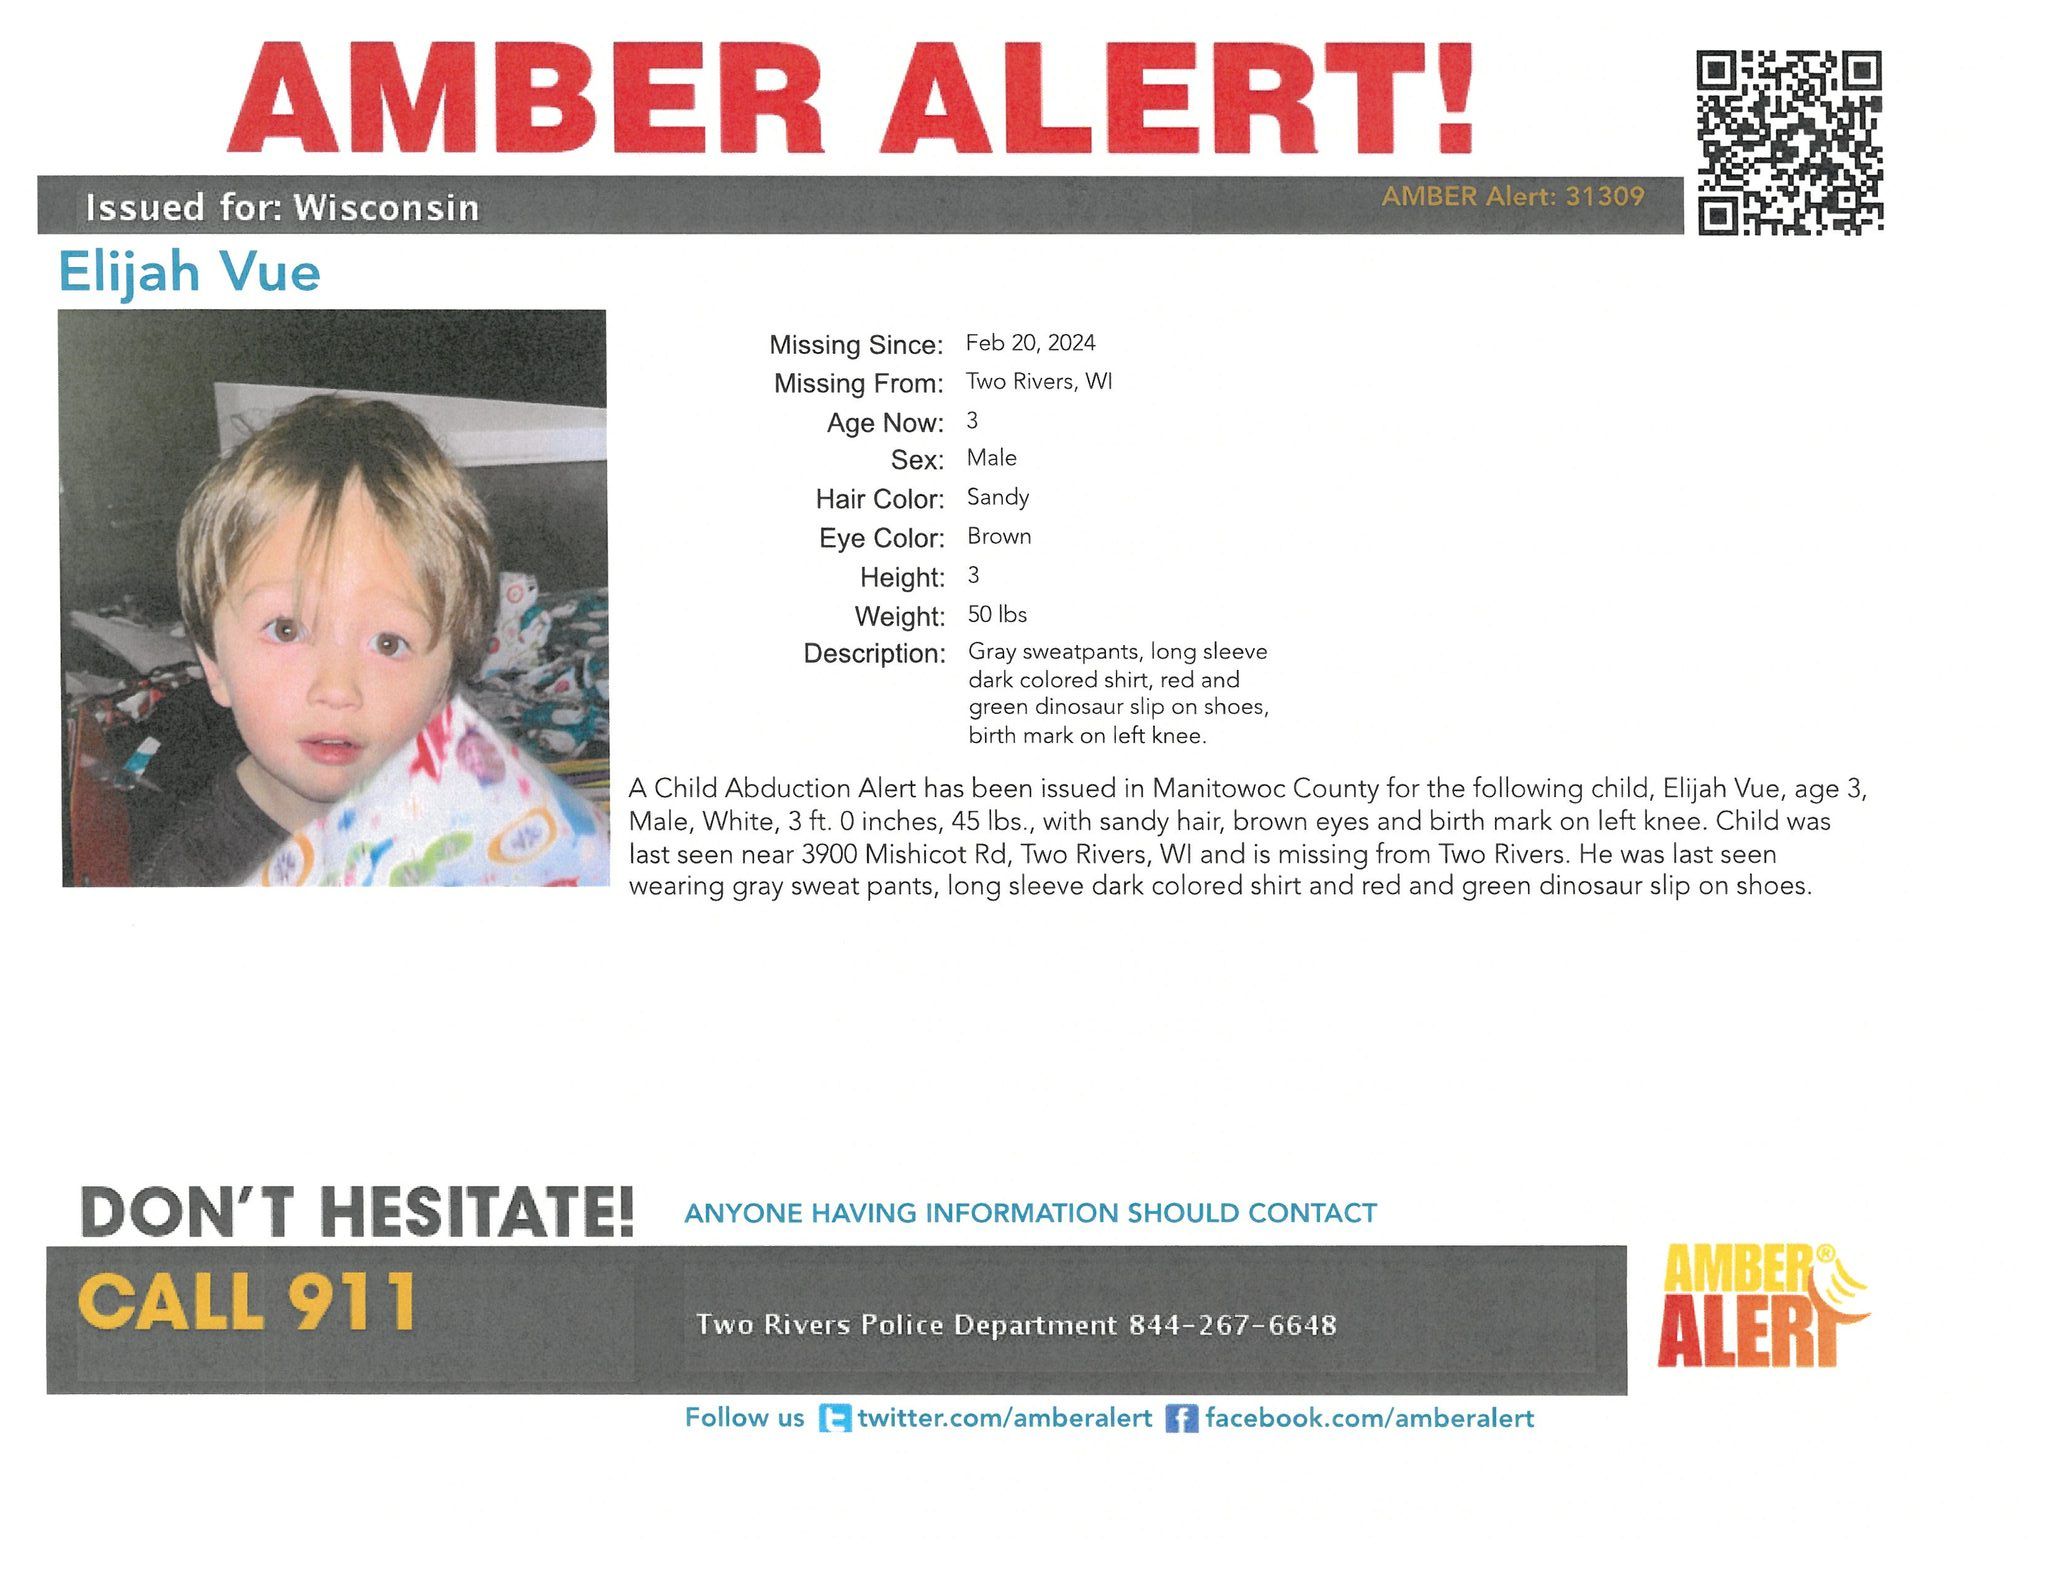 An Amber Alert was issued for Elijah Vue the day he disappeared, 20 February 2024